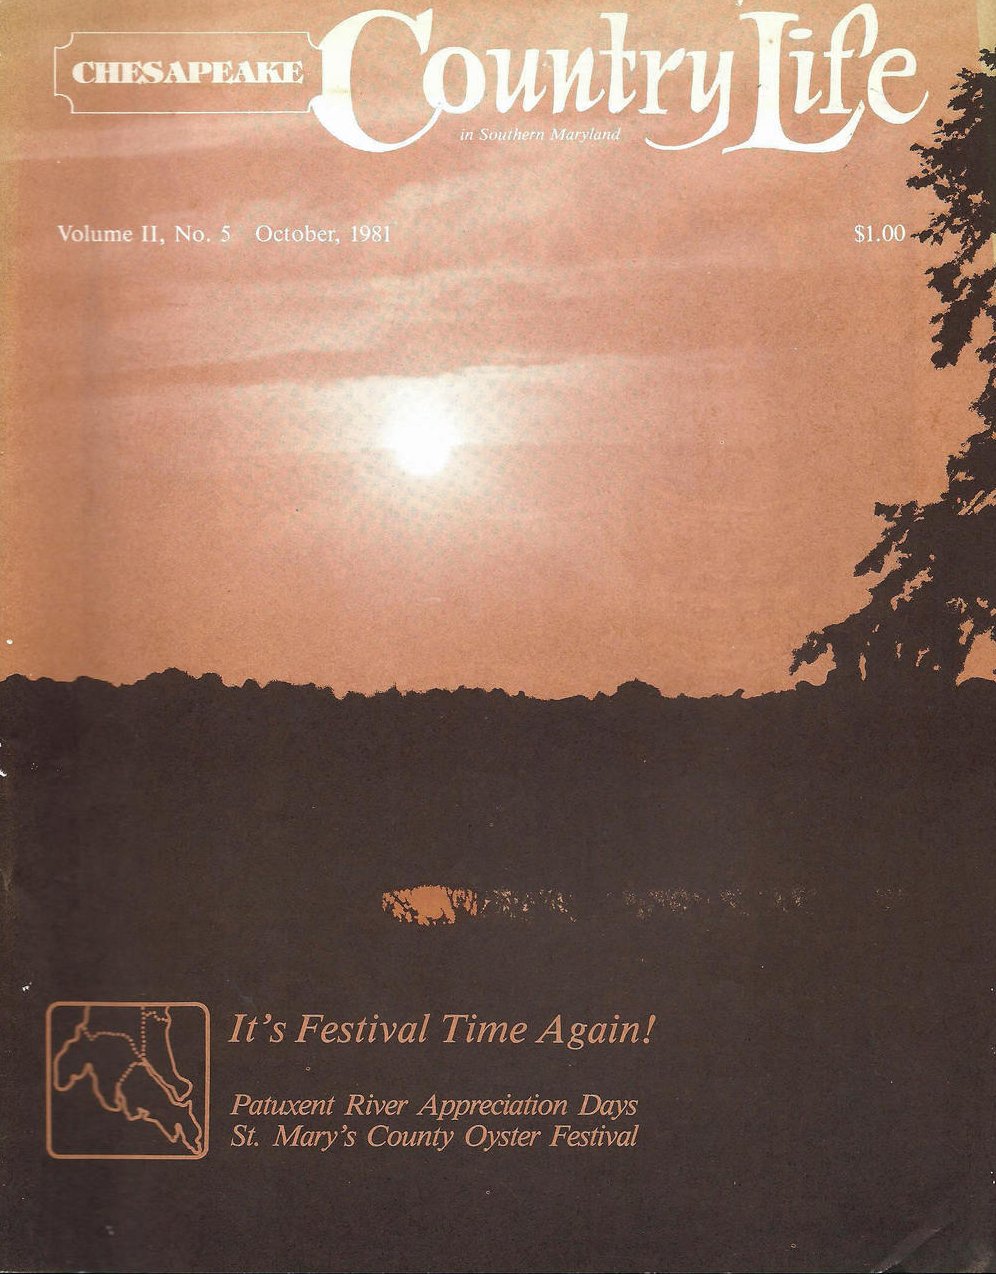 Chesapeake Country Life in Southern Maryland Vol II No 5 October 1981